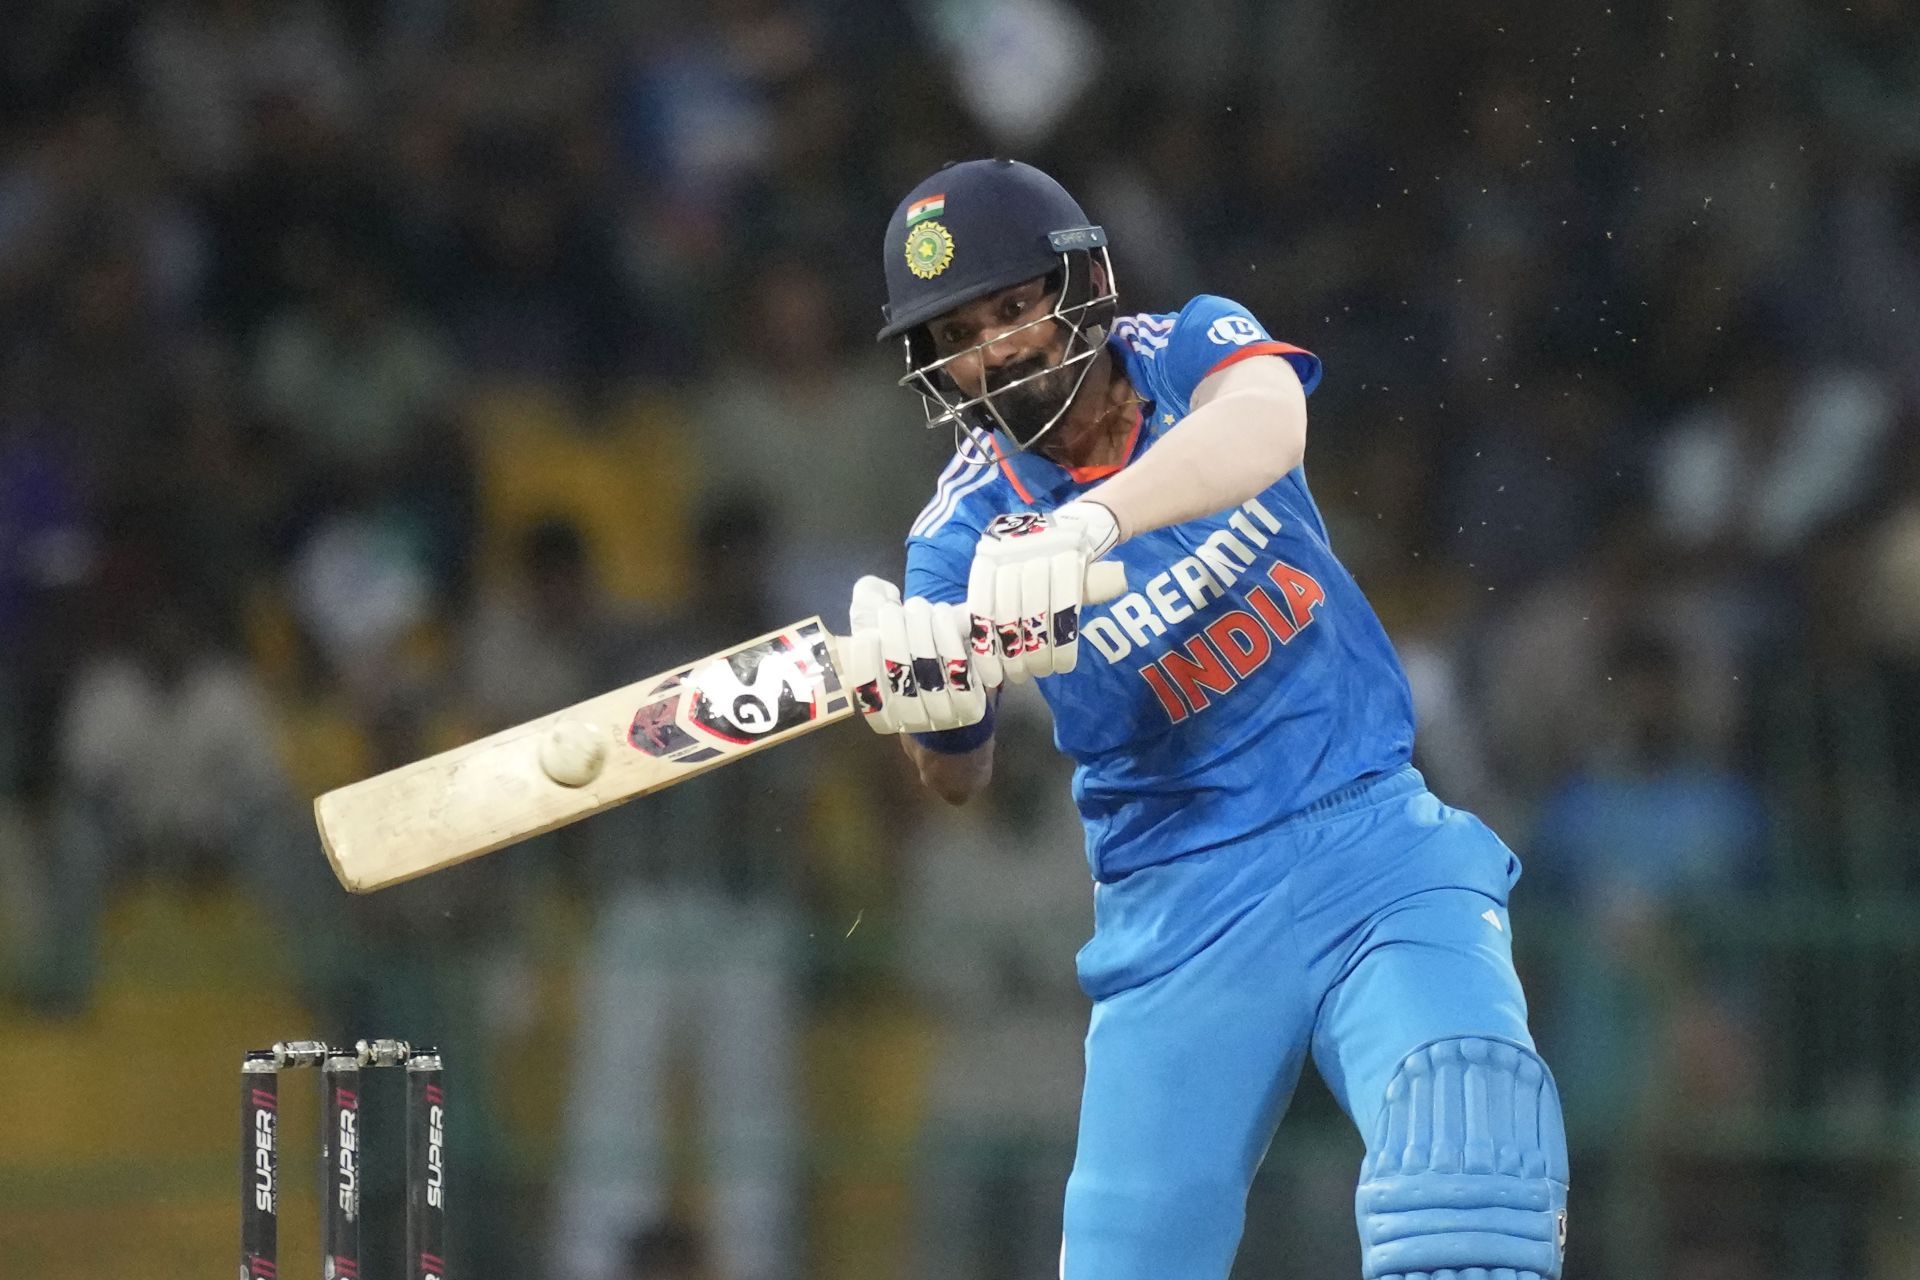 KL Rahul will lead the Men in Blue in the first two ODIs against Australia